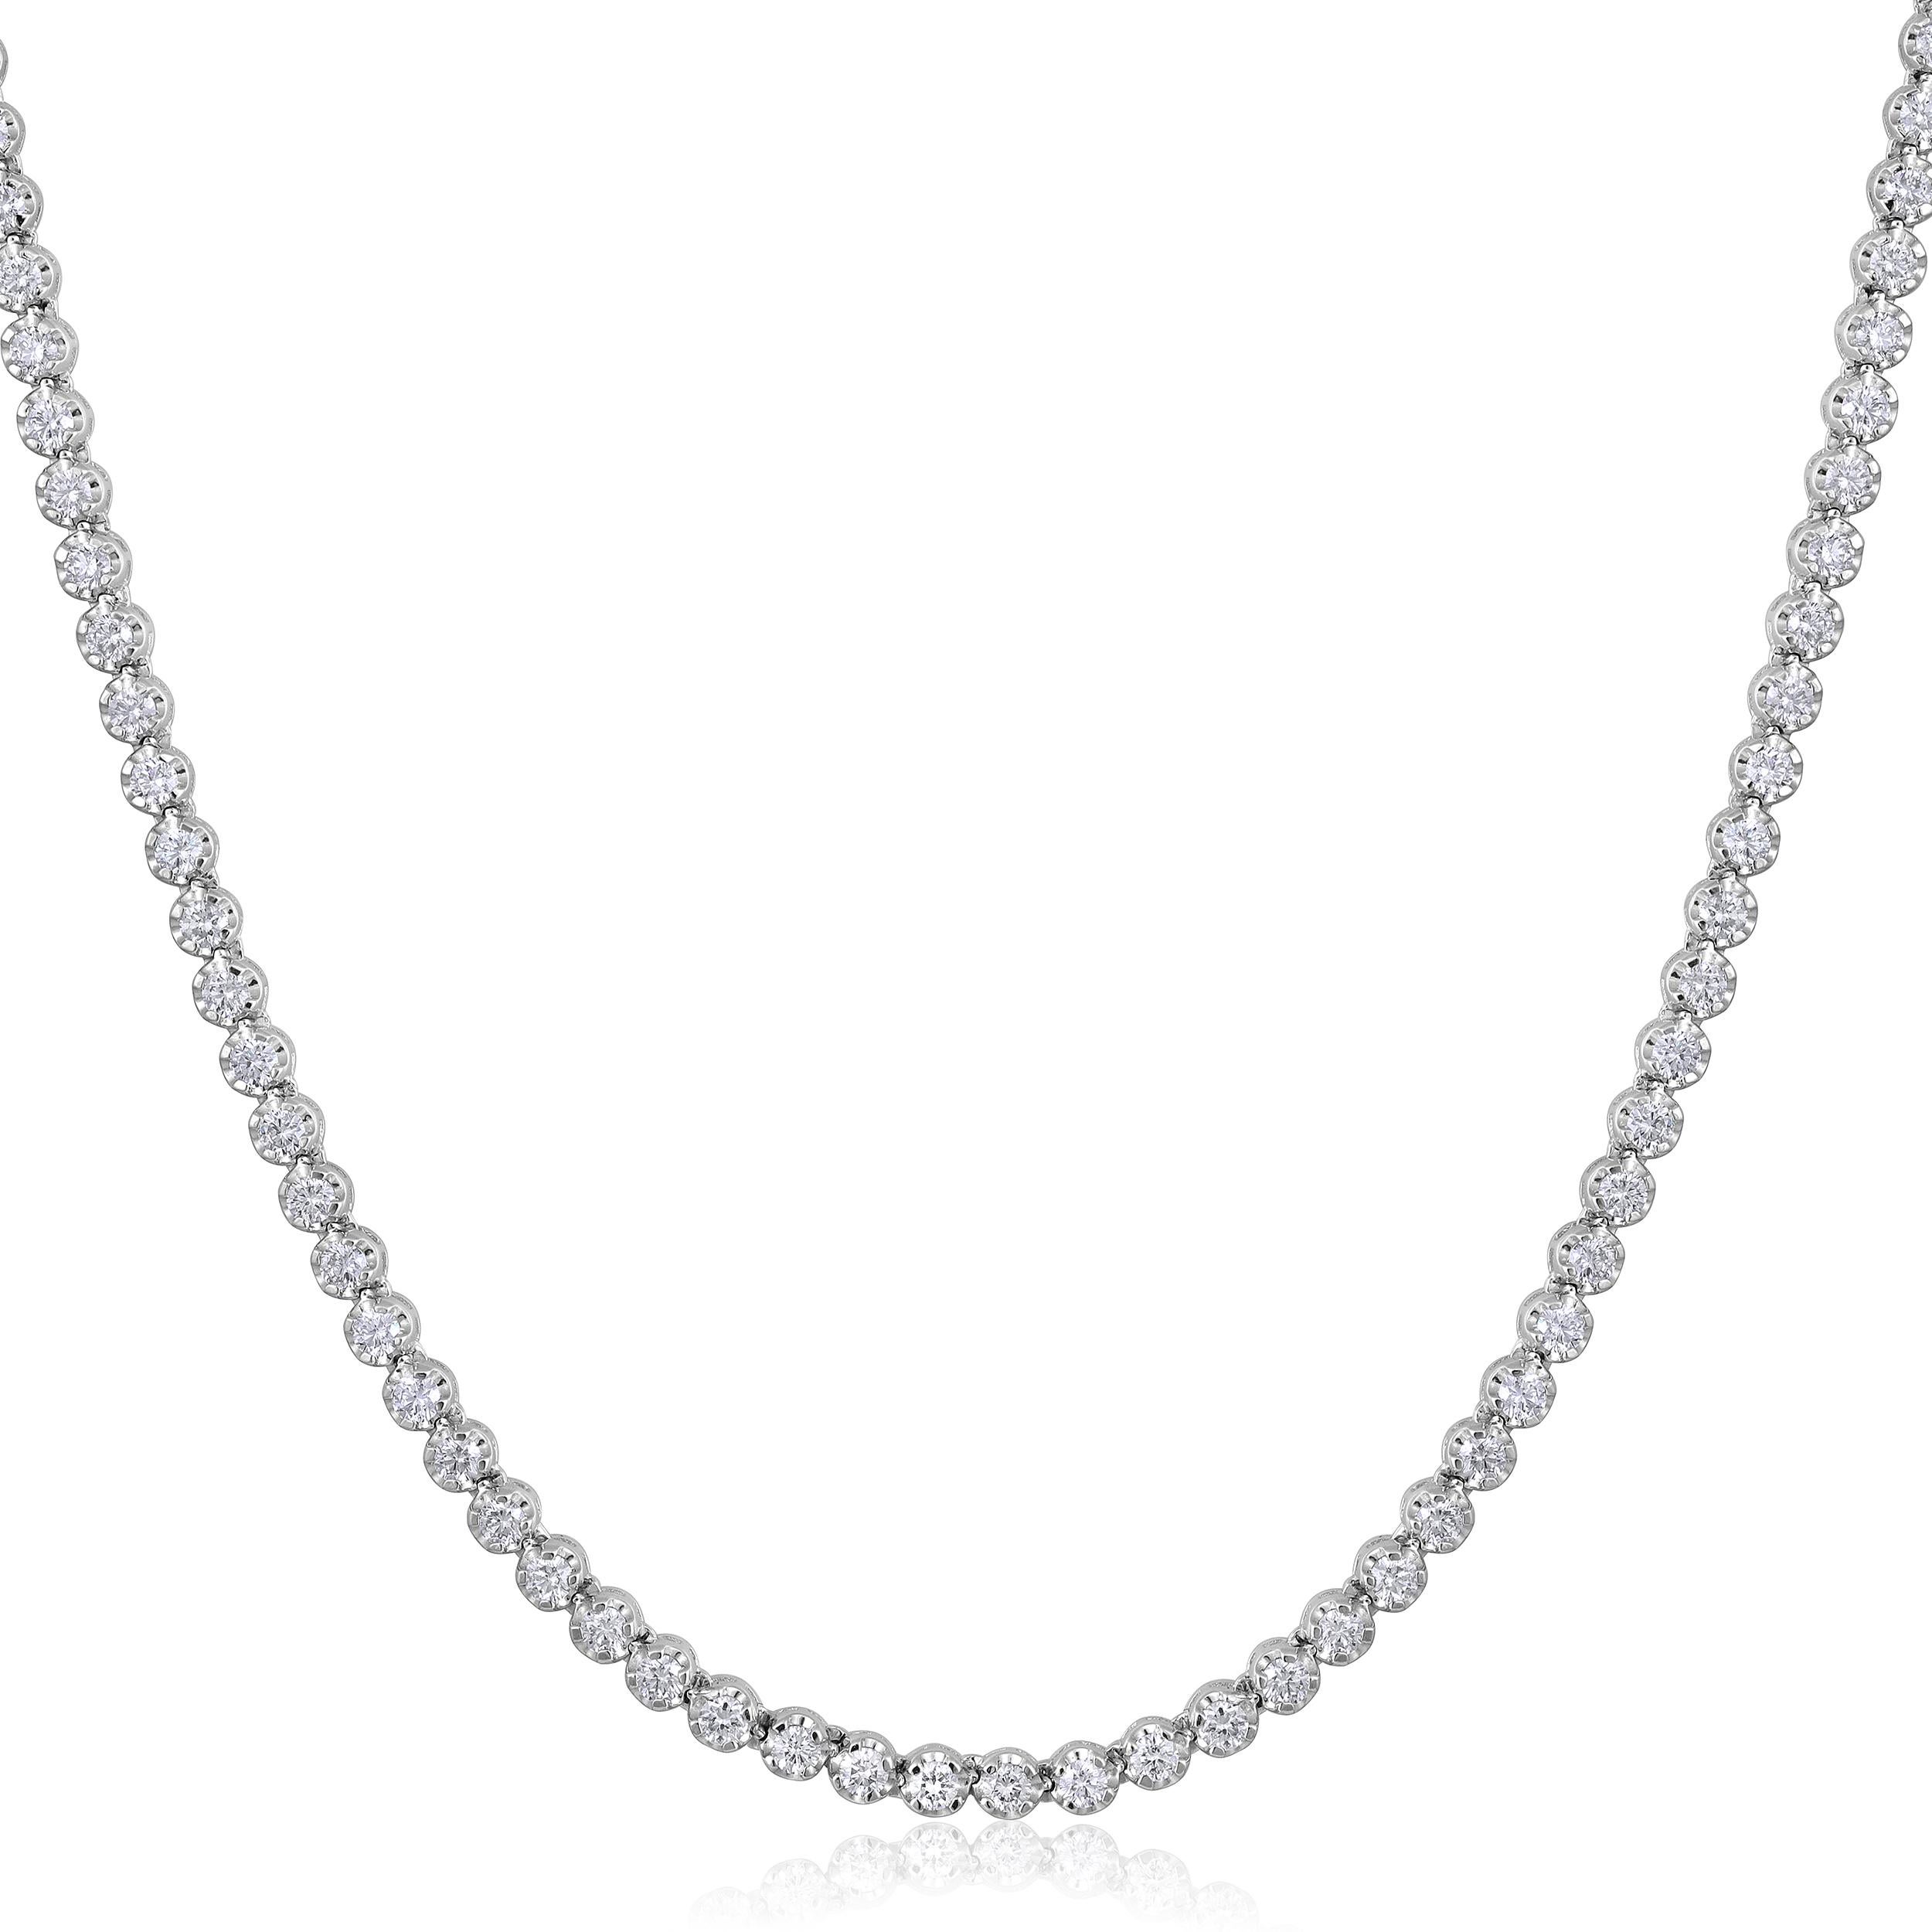 Crafted in 15.07 grams of 14K White Gold, the necklace contains 110 stones of Round Natural Diamonds with a total of 4 carat in G-H color and SI clarity. The necklace length is 18 inches.

CONTEMPORARY AND TIMELESS ESSENCE: Crafted in